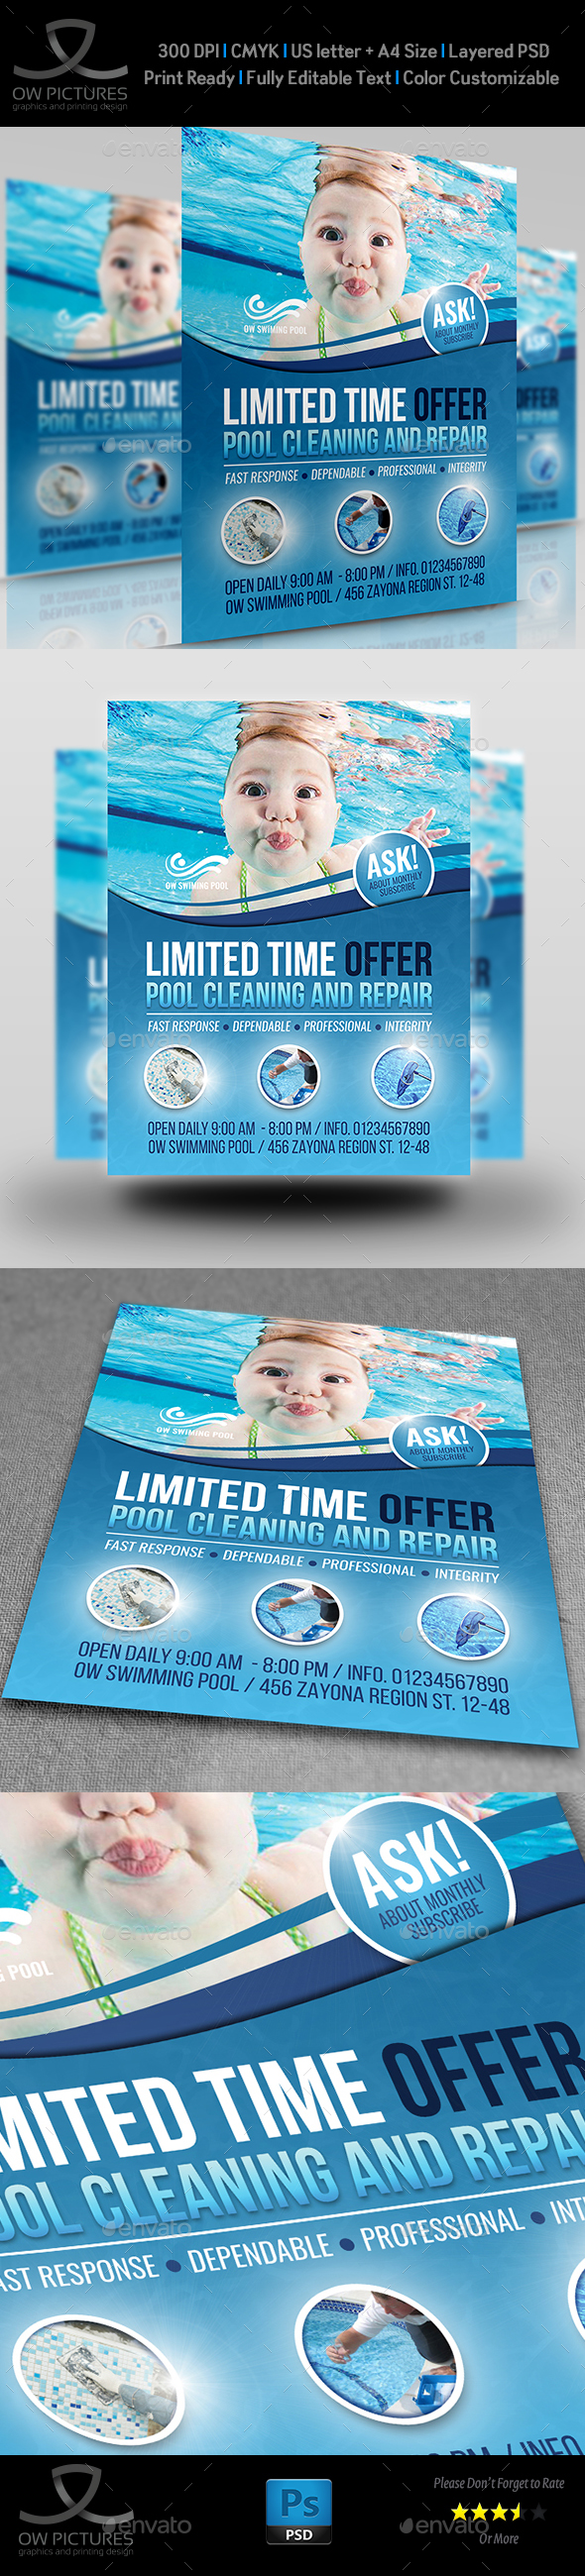 Swimming Pool Cleaning Service Flyer Template Vol.2